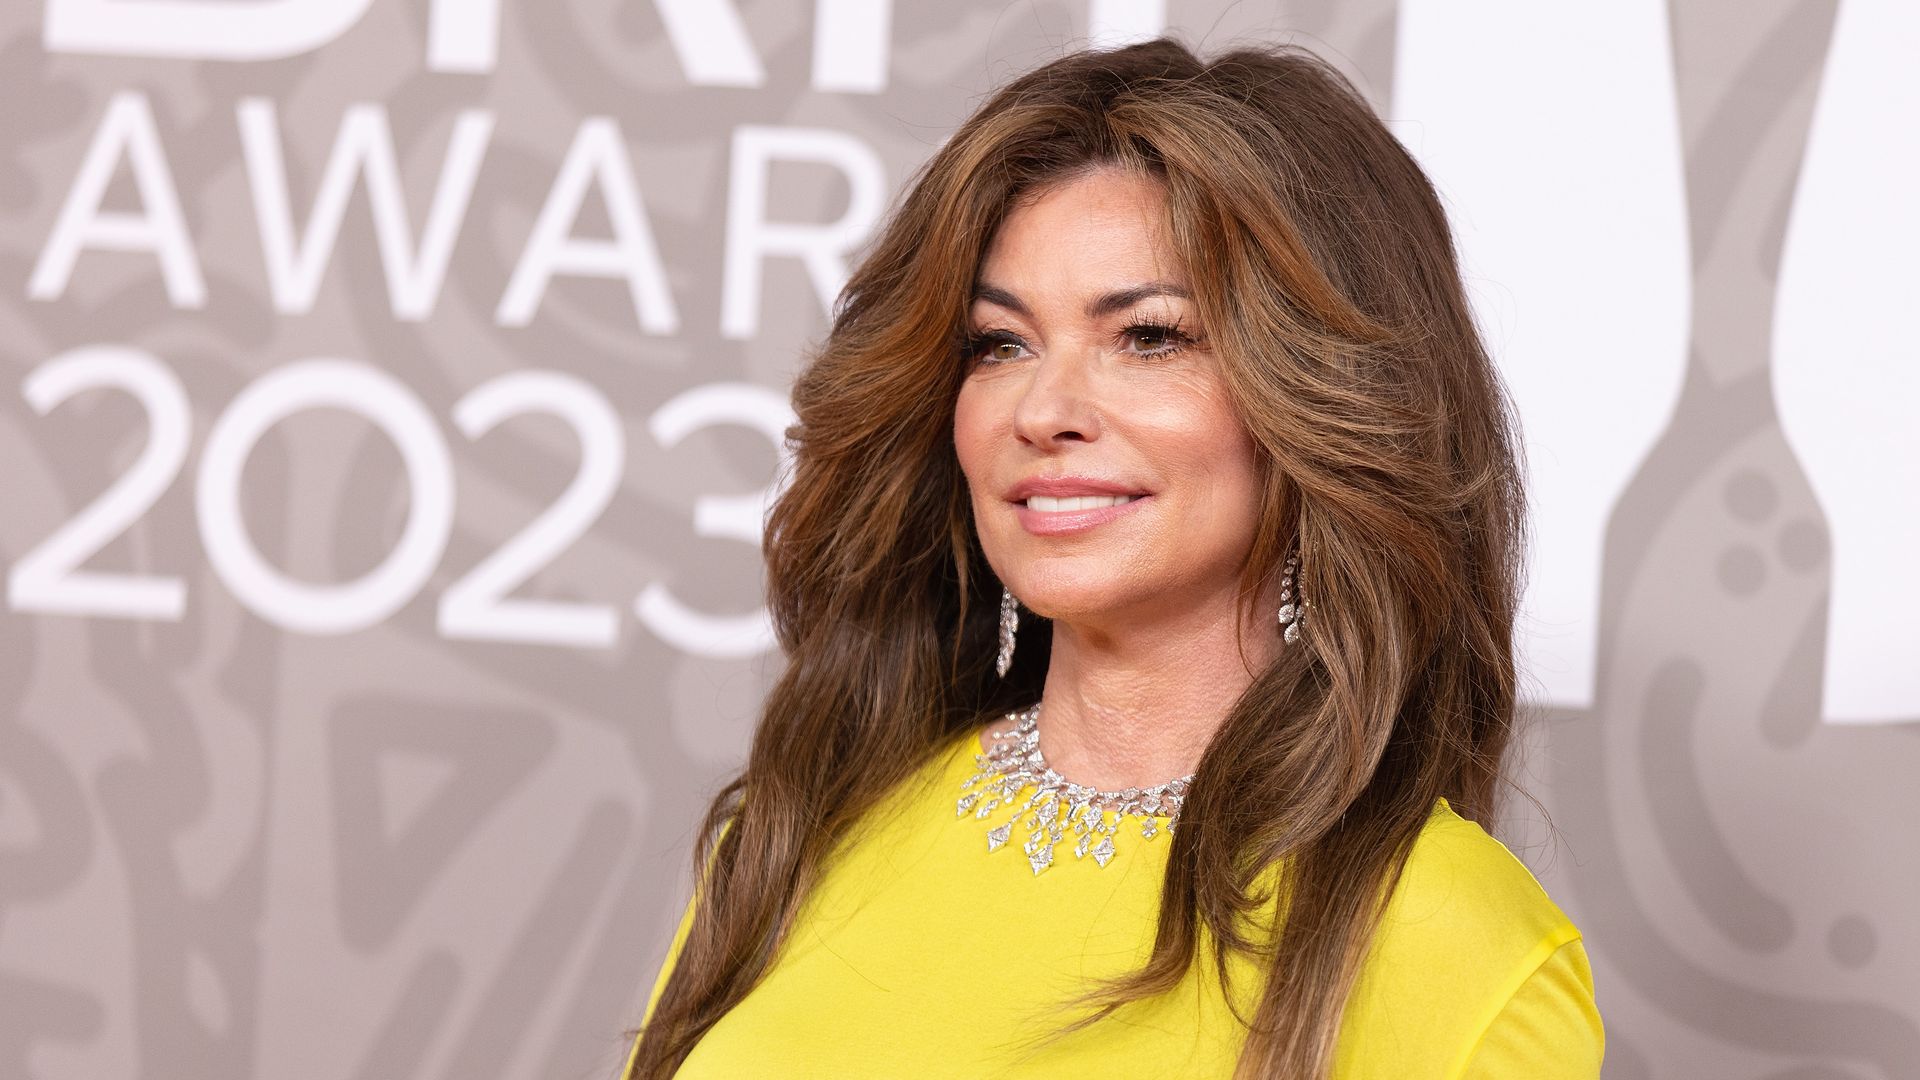 Shania Twain attends The BRIT Awards 2023  at The O2 Arena on February 11, 2023 in London, England